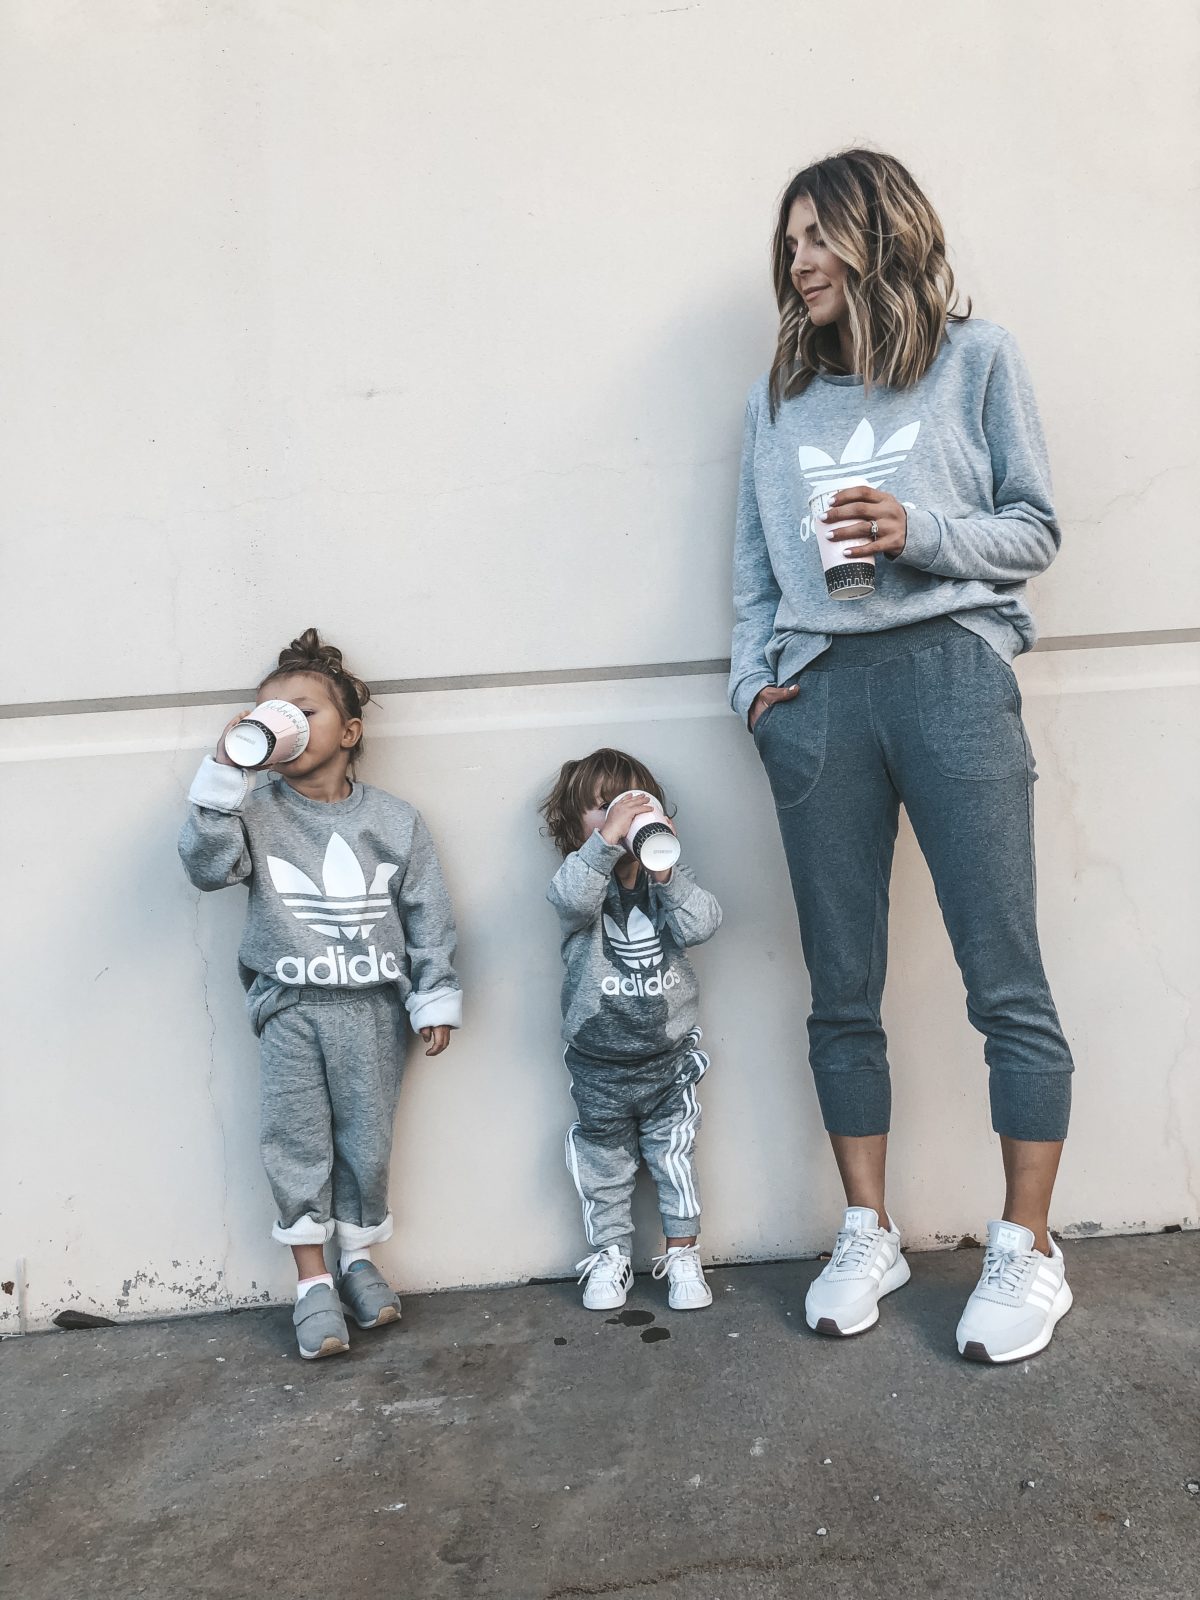 matching adidas shoes for family